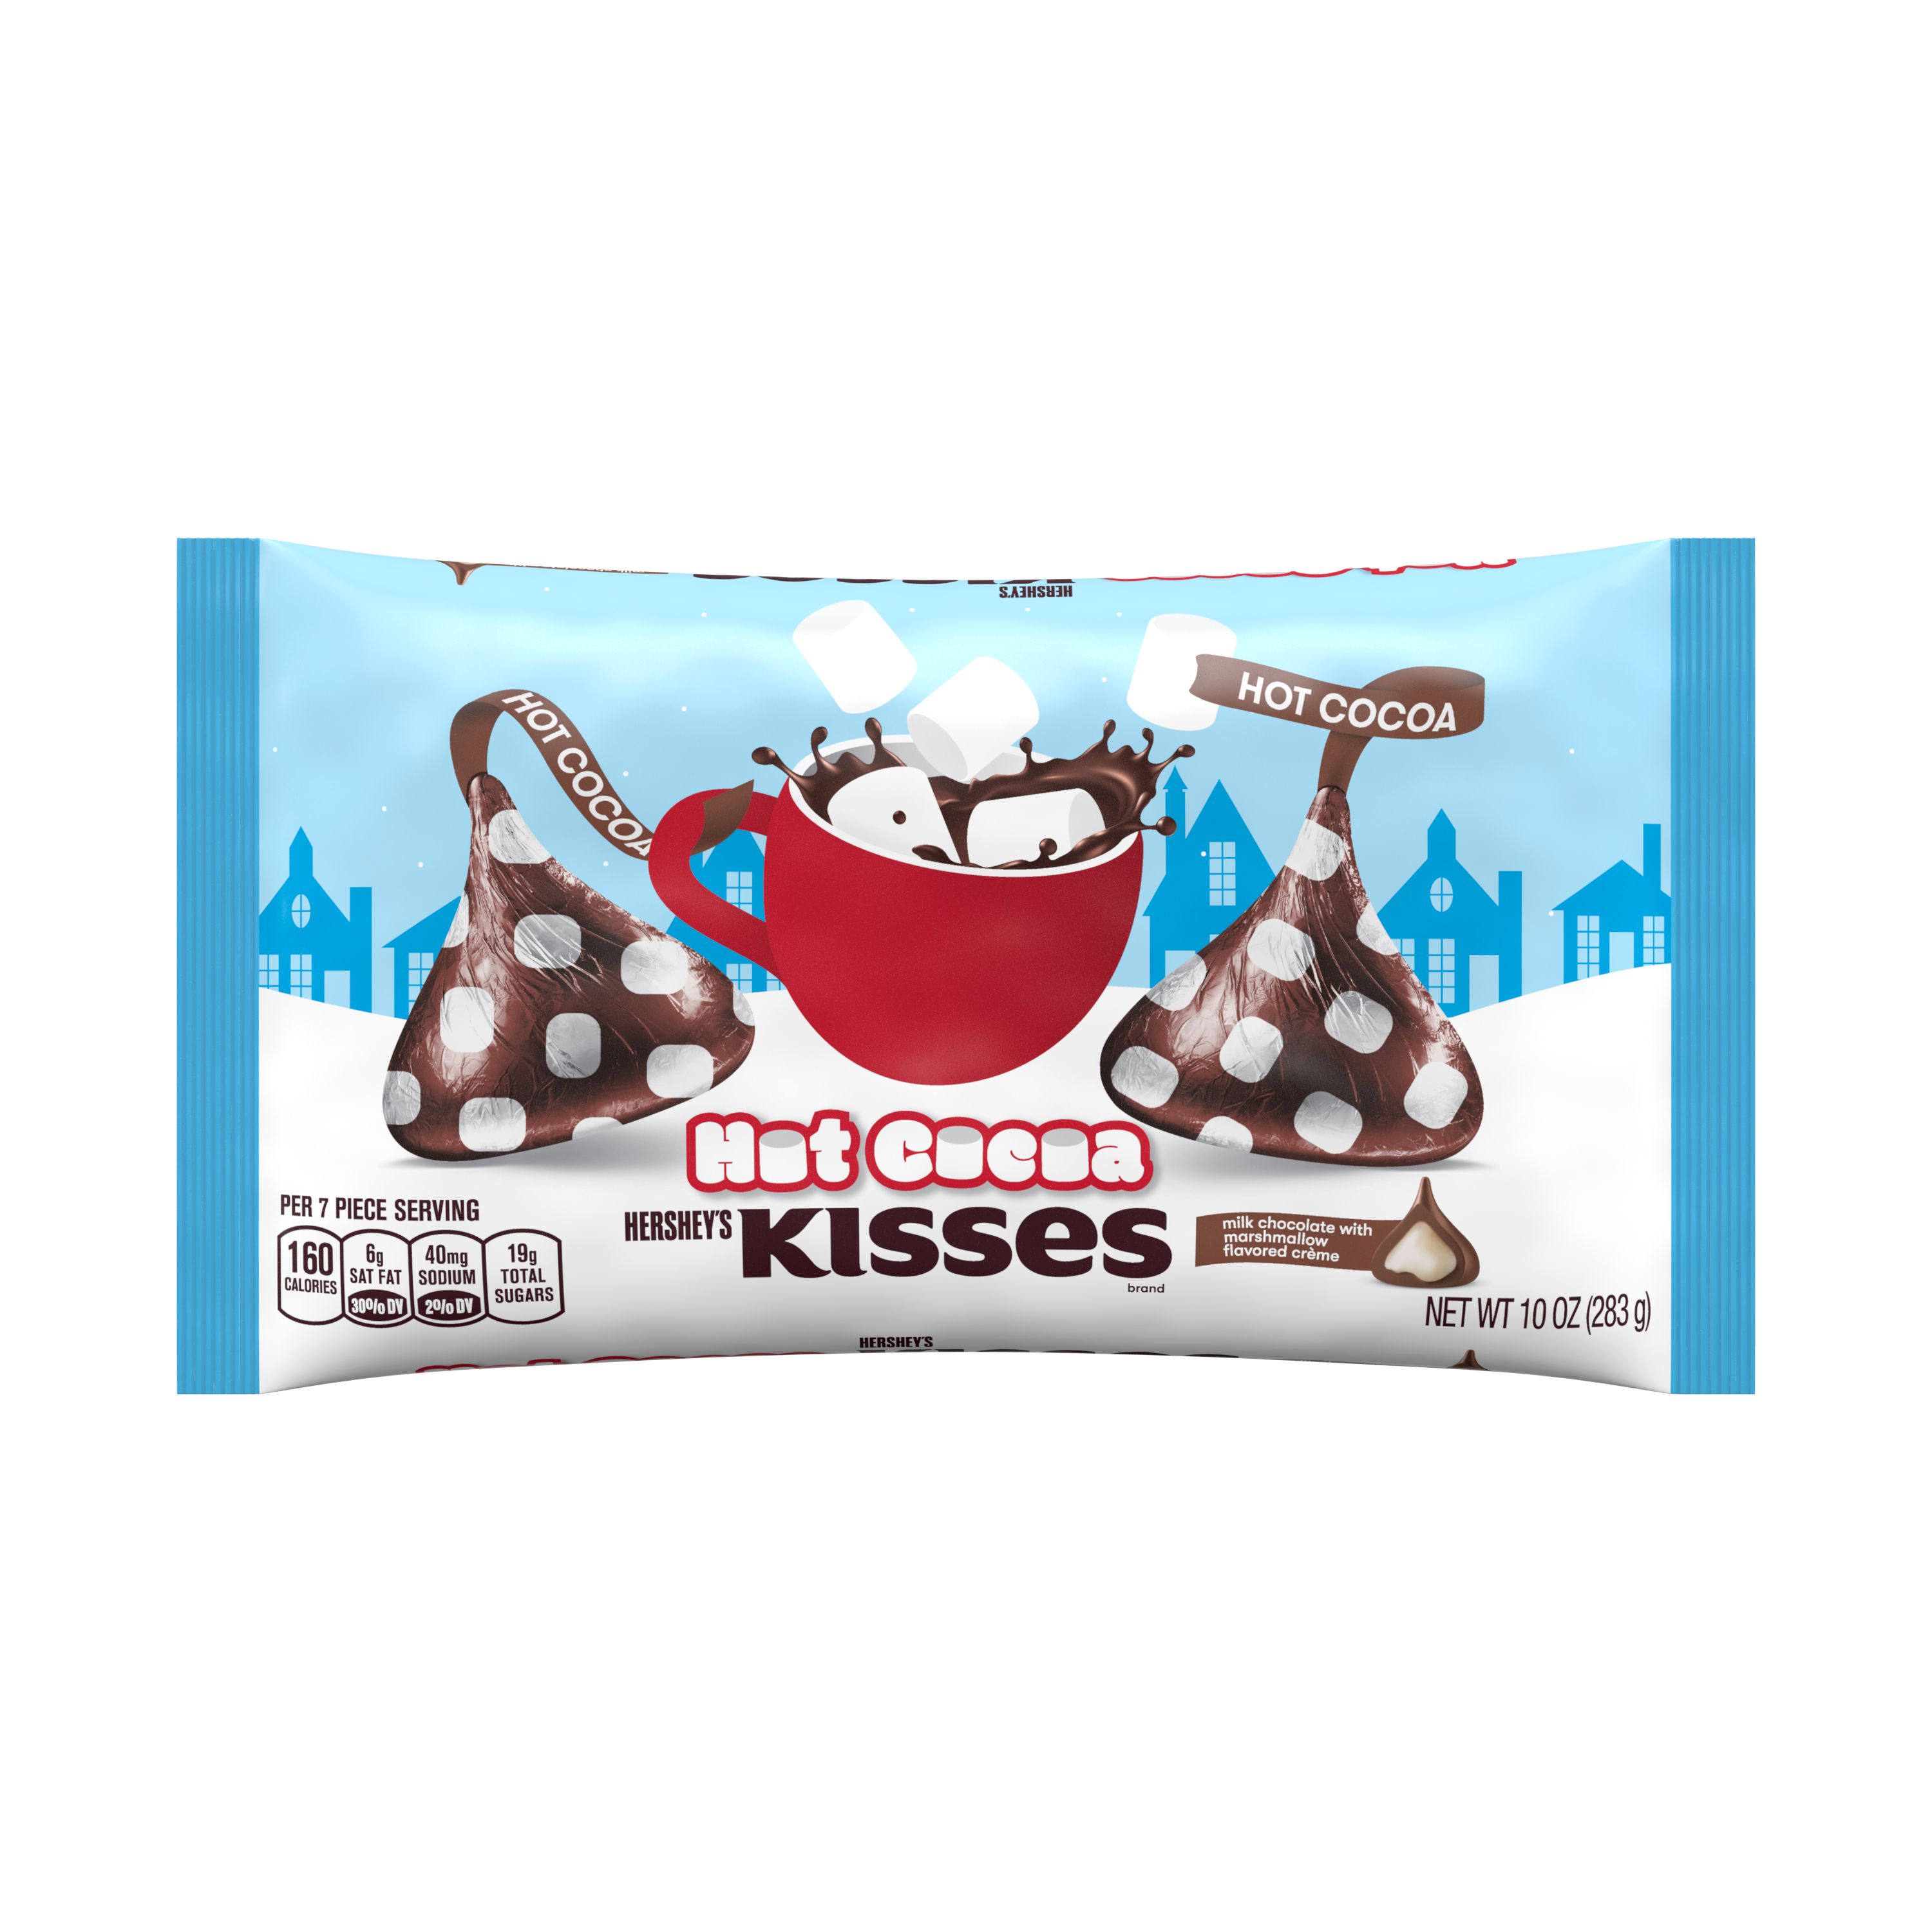 Hershey's Kisses Hot Cocoa Chocolate Candy, Holiday Bag, 10 Oz. - image 1 of 6